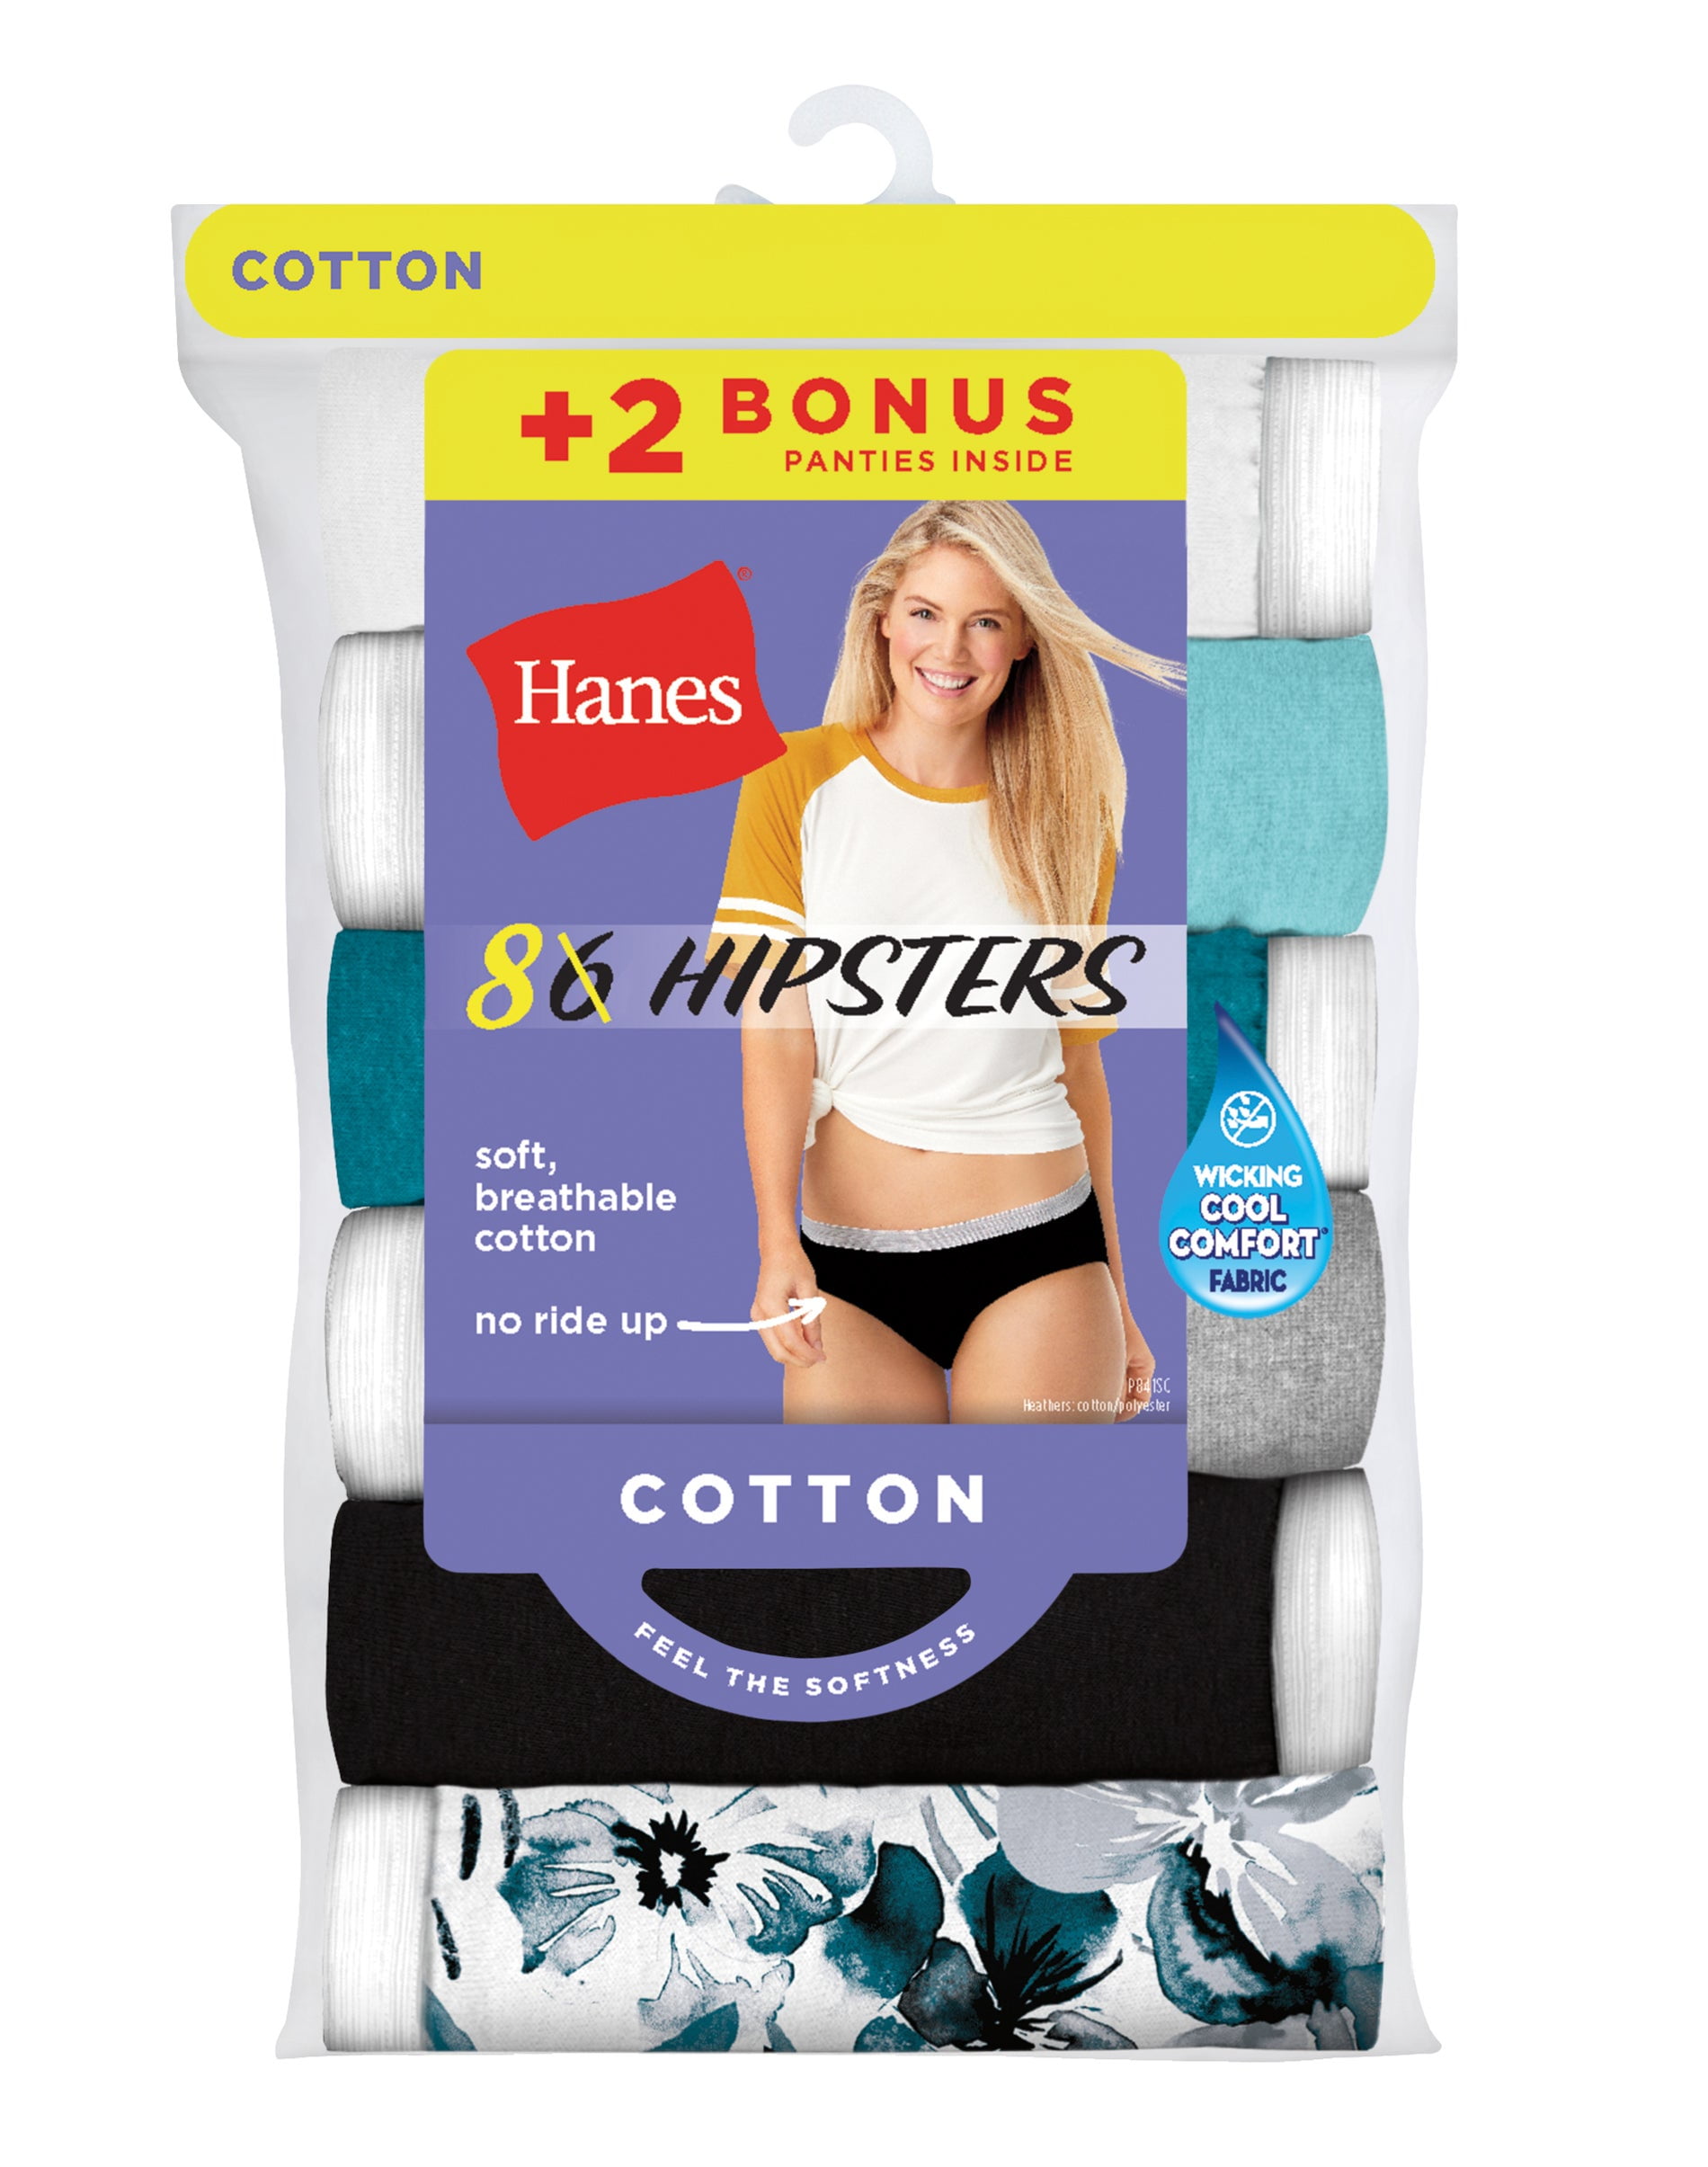 Hanes Women's Panties Pack, Soft Cotton Hipsters, Underwear 6